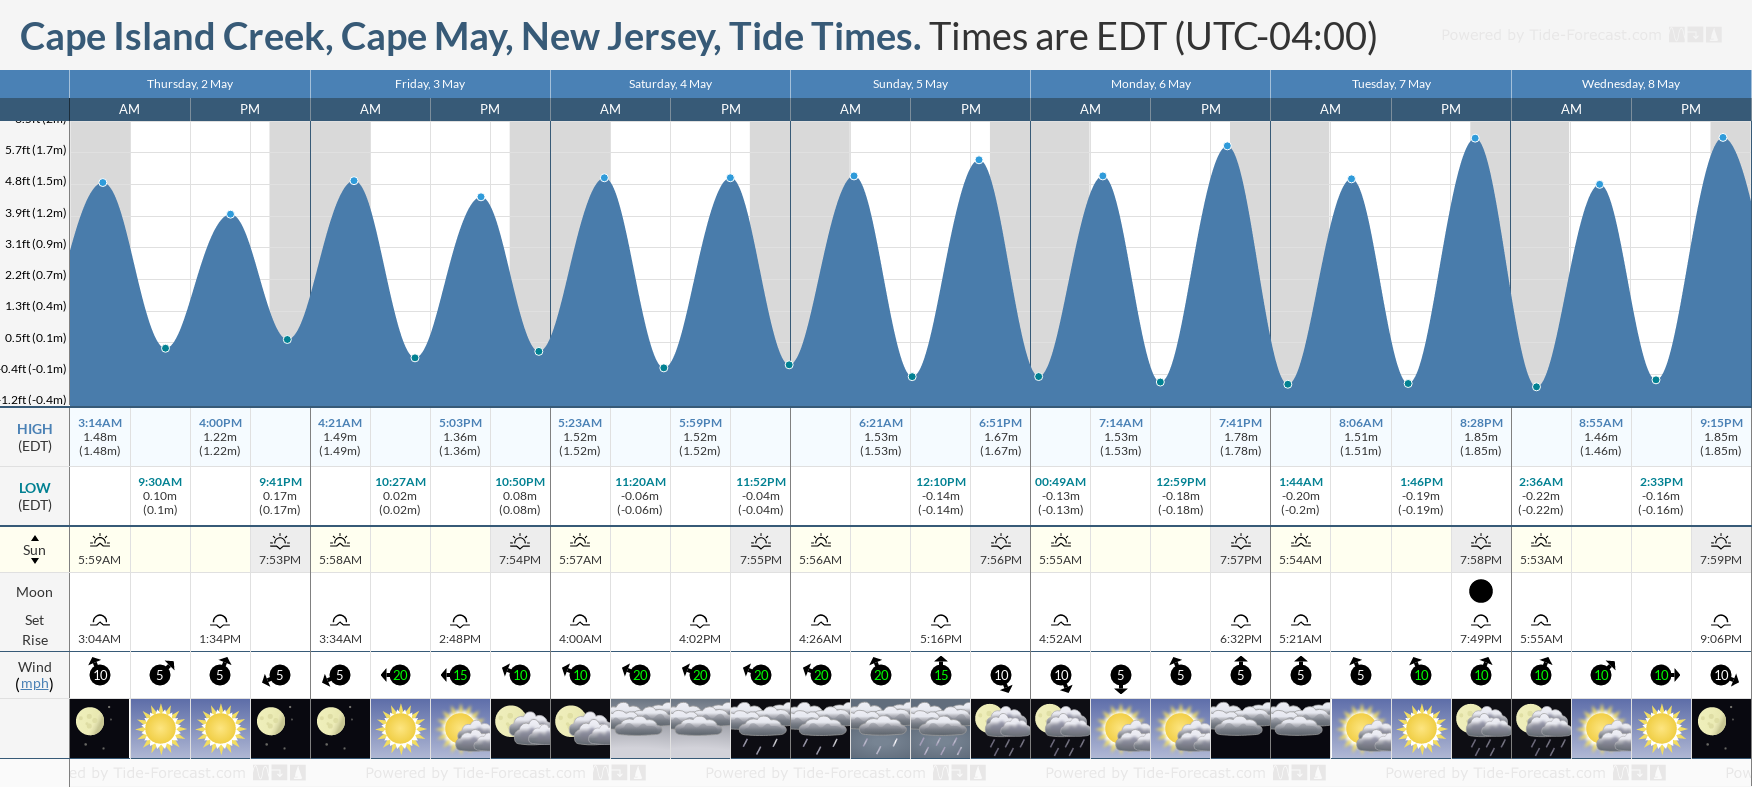 Cape Island Creek, Cape May, New Jersey Tide Chart including high and low tide tide times for the next 7 days